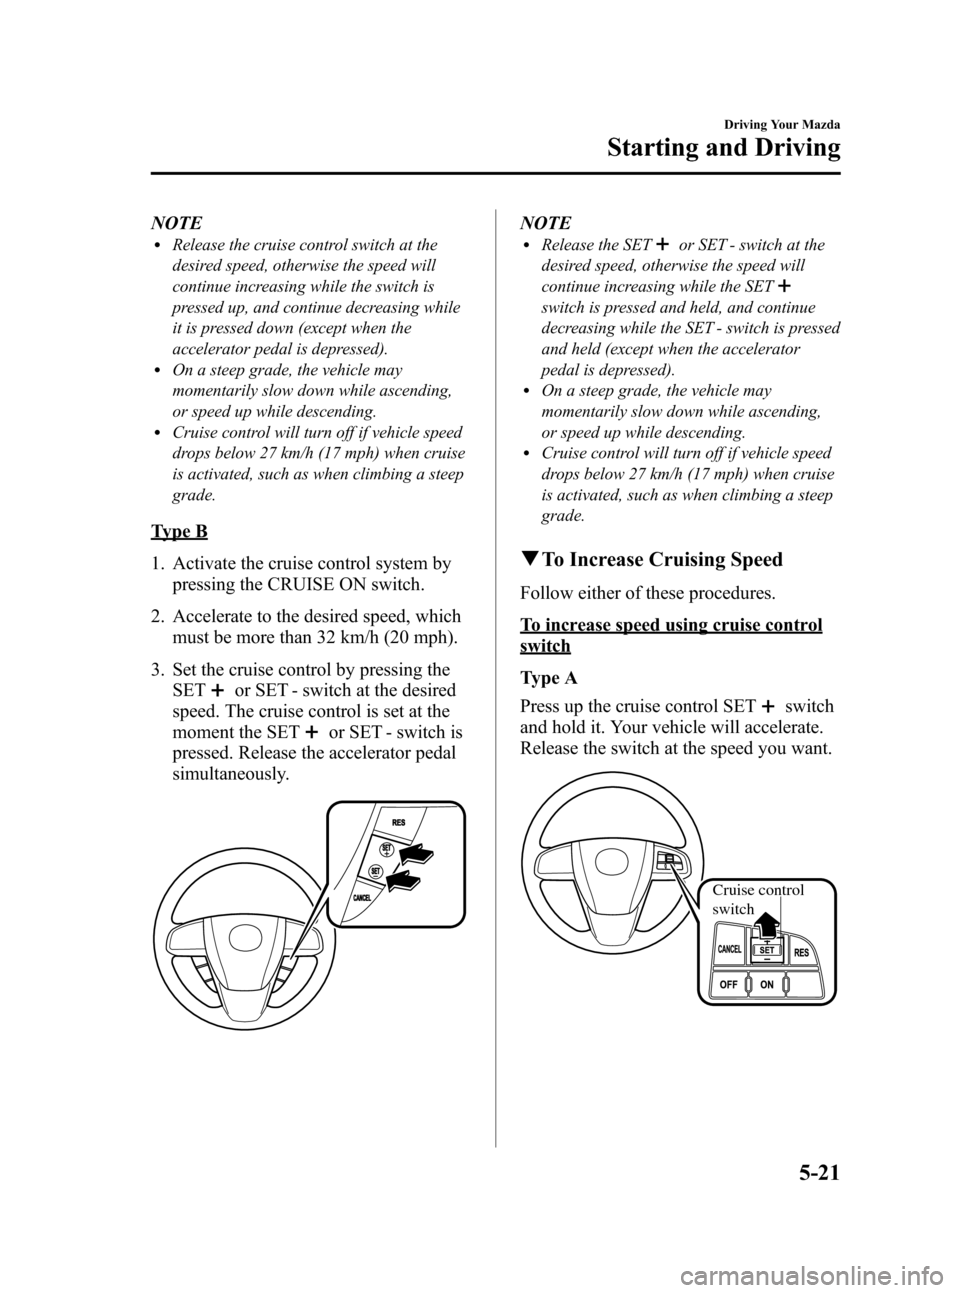 MAZDA MODEL 3 HATCHBACK 2010  Owners Manual (in English) Black plate (177,1)
NOTElRelease the cruise control switch at the
desired speed, otherwise the speed will
continue increasing while the switch is
pressed up, and continue decreasing while
it is presse